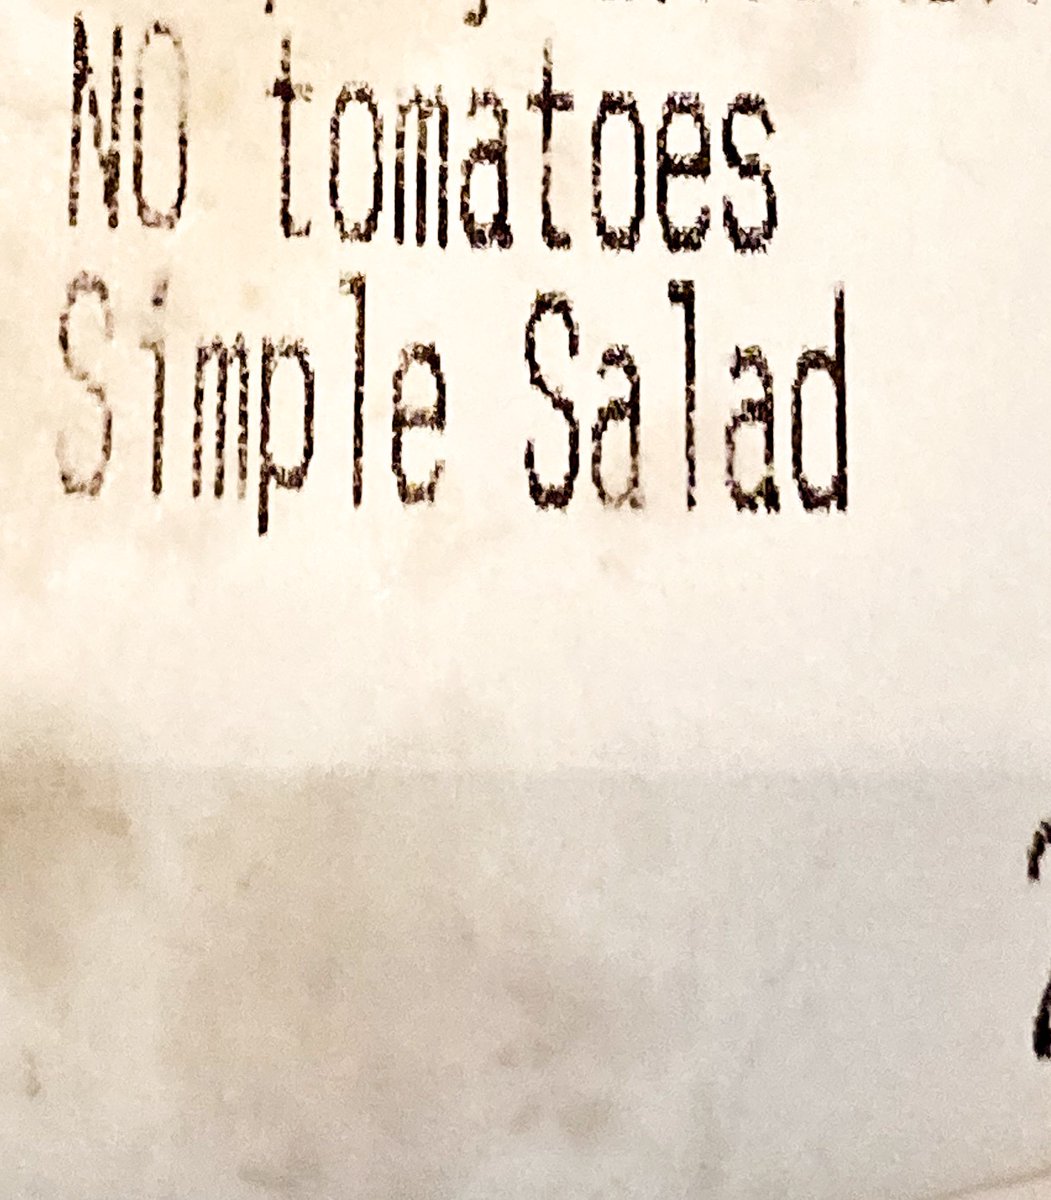 Trying to figure out what I did to upset the person who made my small side salad with no tomatoes...